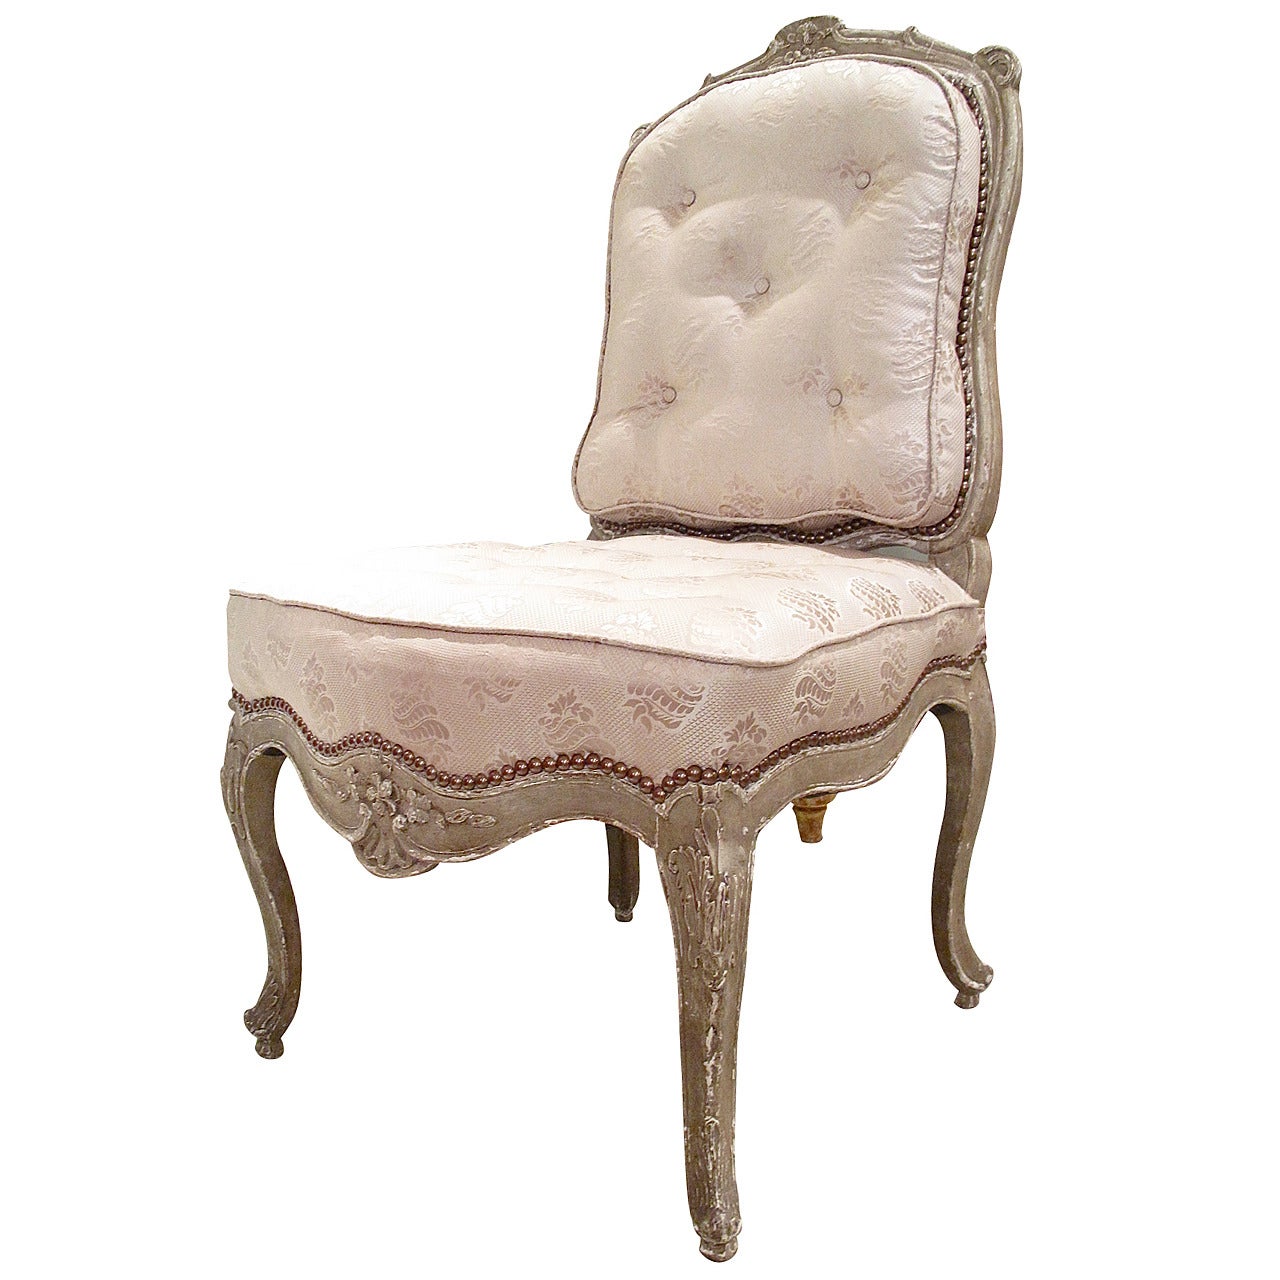 Italian Rococo Style Painted Slipper Chair